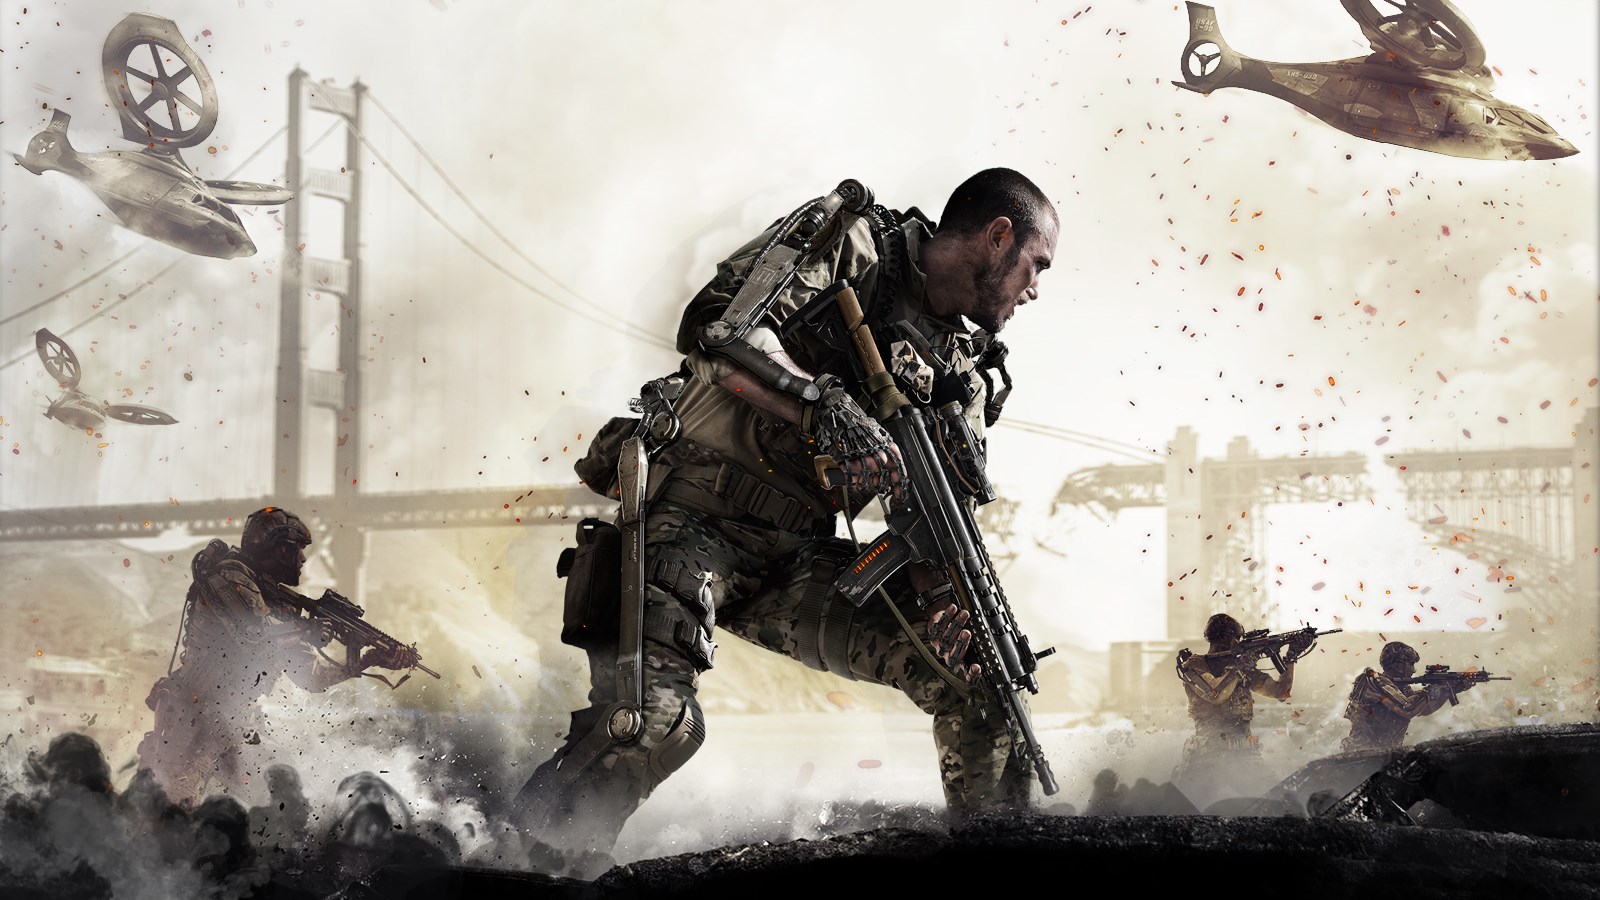 cod aw wallpaper,action adventure game,movie,games,pc game,action film